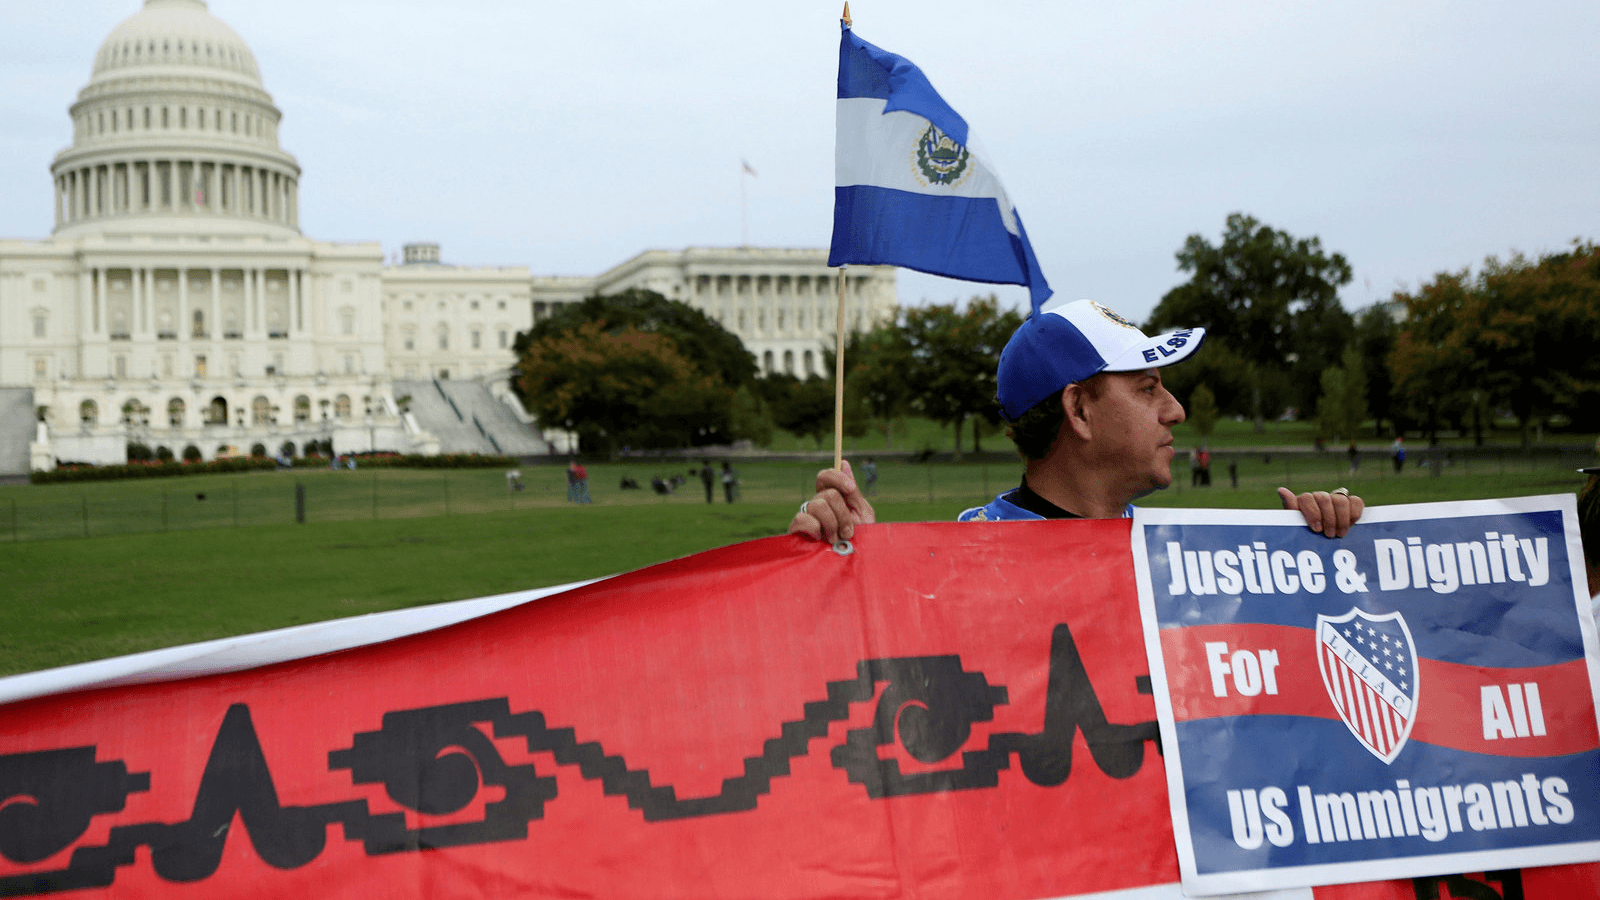 A Salvadoran man holds his nation's flag and a sign during a protest rally for immigrants rights on Capitol Hill in Washington, D.C., Oct. 8, 2013.